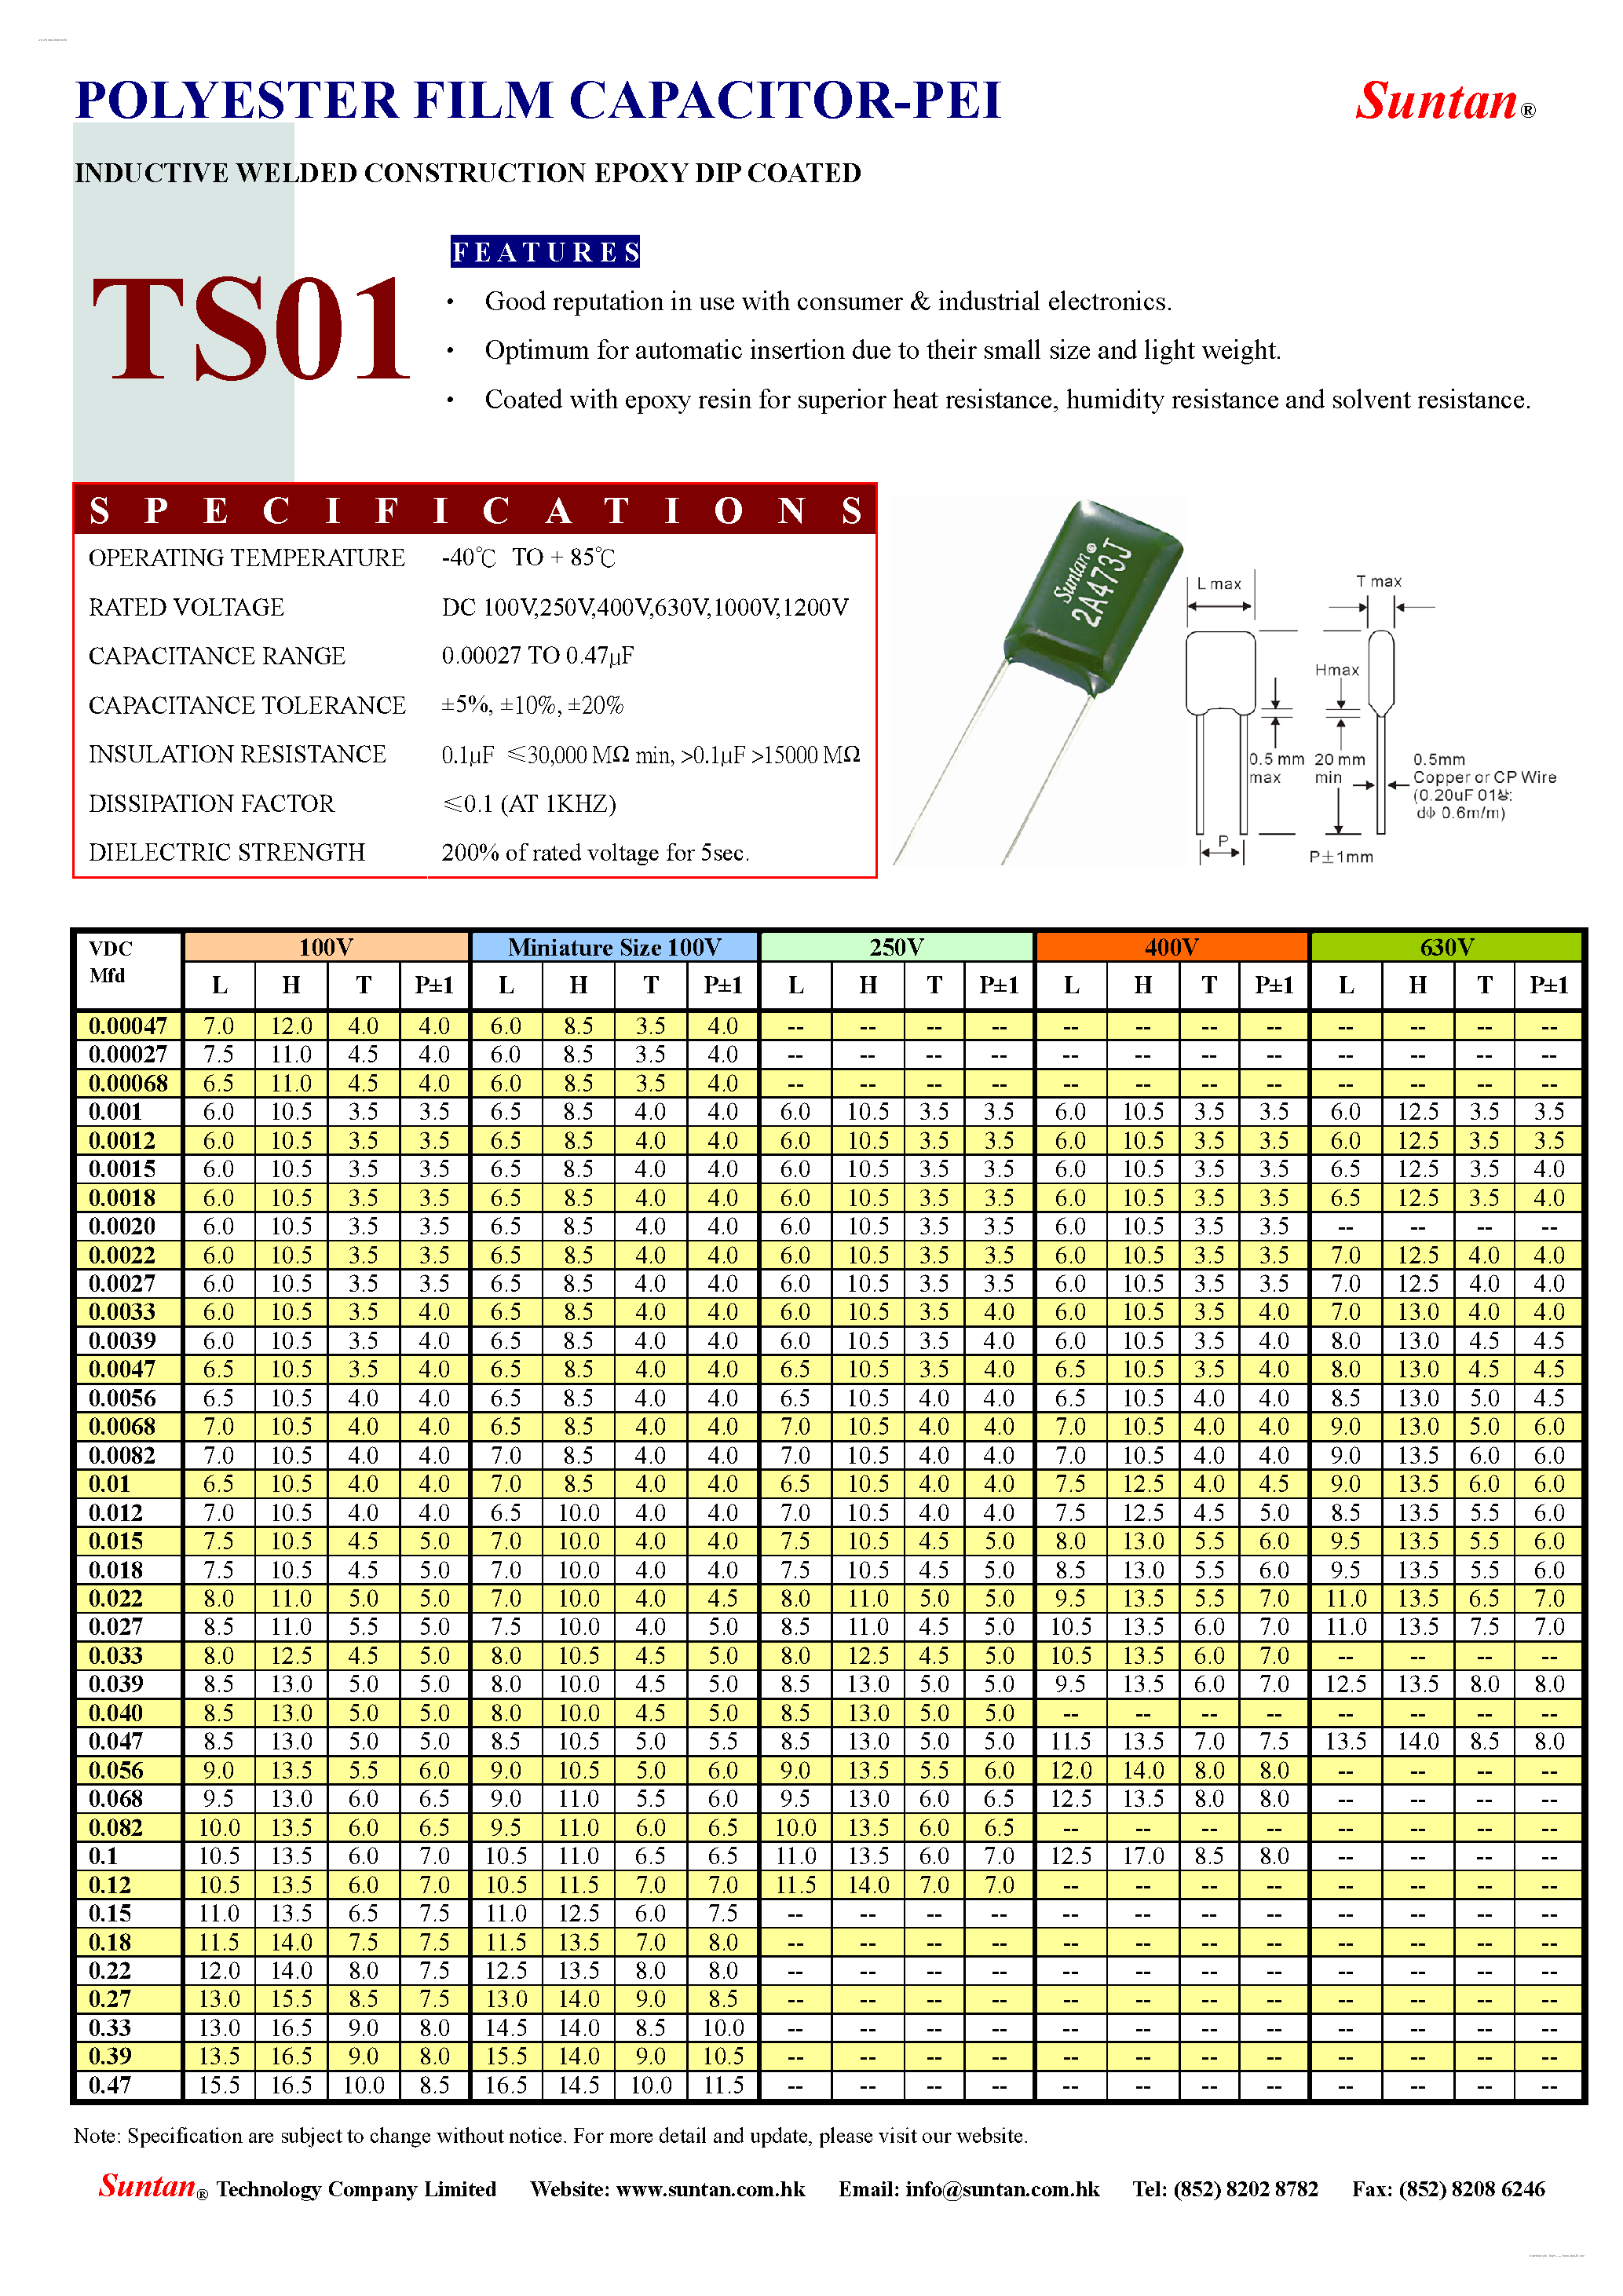 Datasheet TS01 - POLYESTER FILM CAPACITOR-PEI page 1